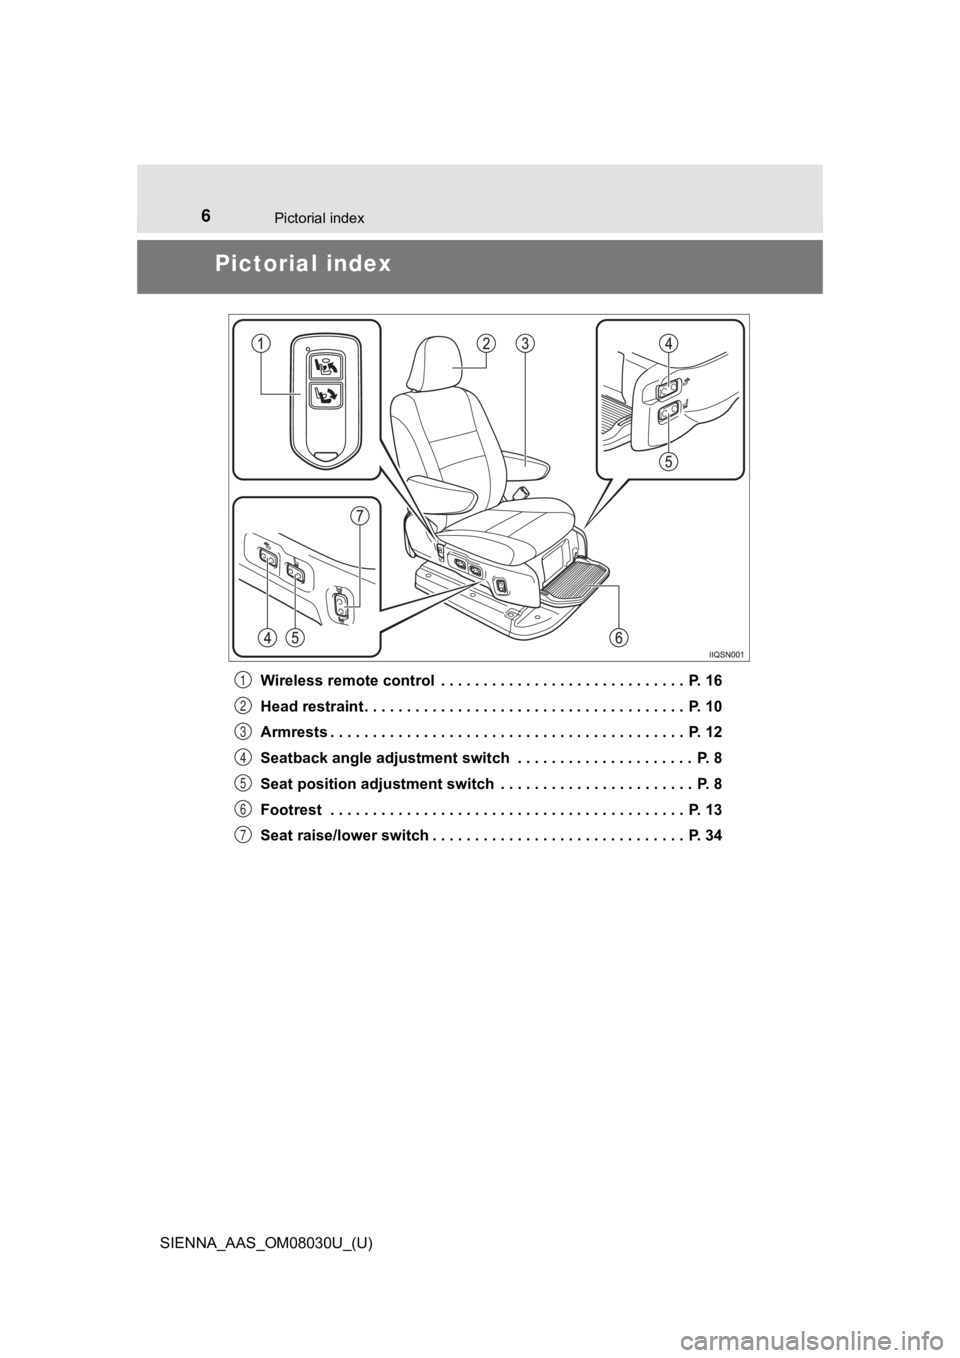 TOYOTA SIENNA 2019  Owners Manual (in English) 6Pictorial index
SIENNA_AAS_OM08030U_(U)
Pictorial index
Wireless remote control  . . . . . . . . . . . . . . . . . . . . . . . . . . . . .  P. 16
Head restraint . . . . . . . . . . . . . . . . . . . 